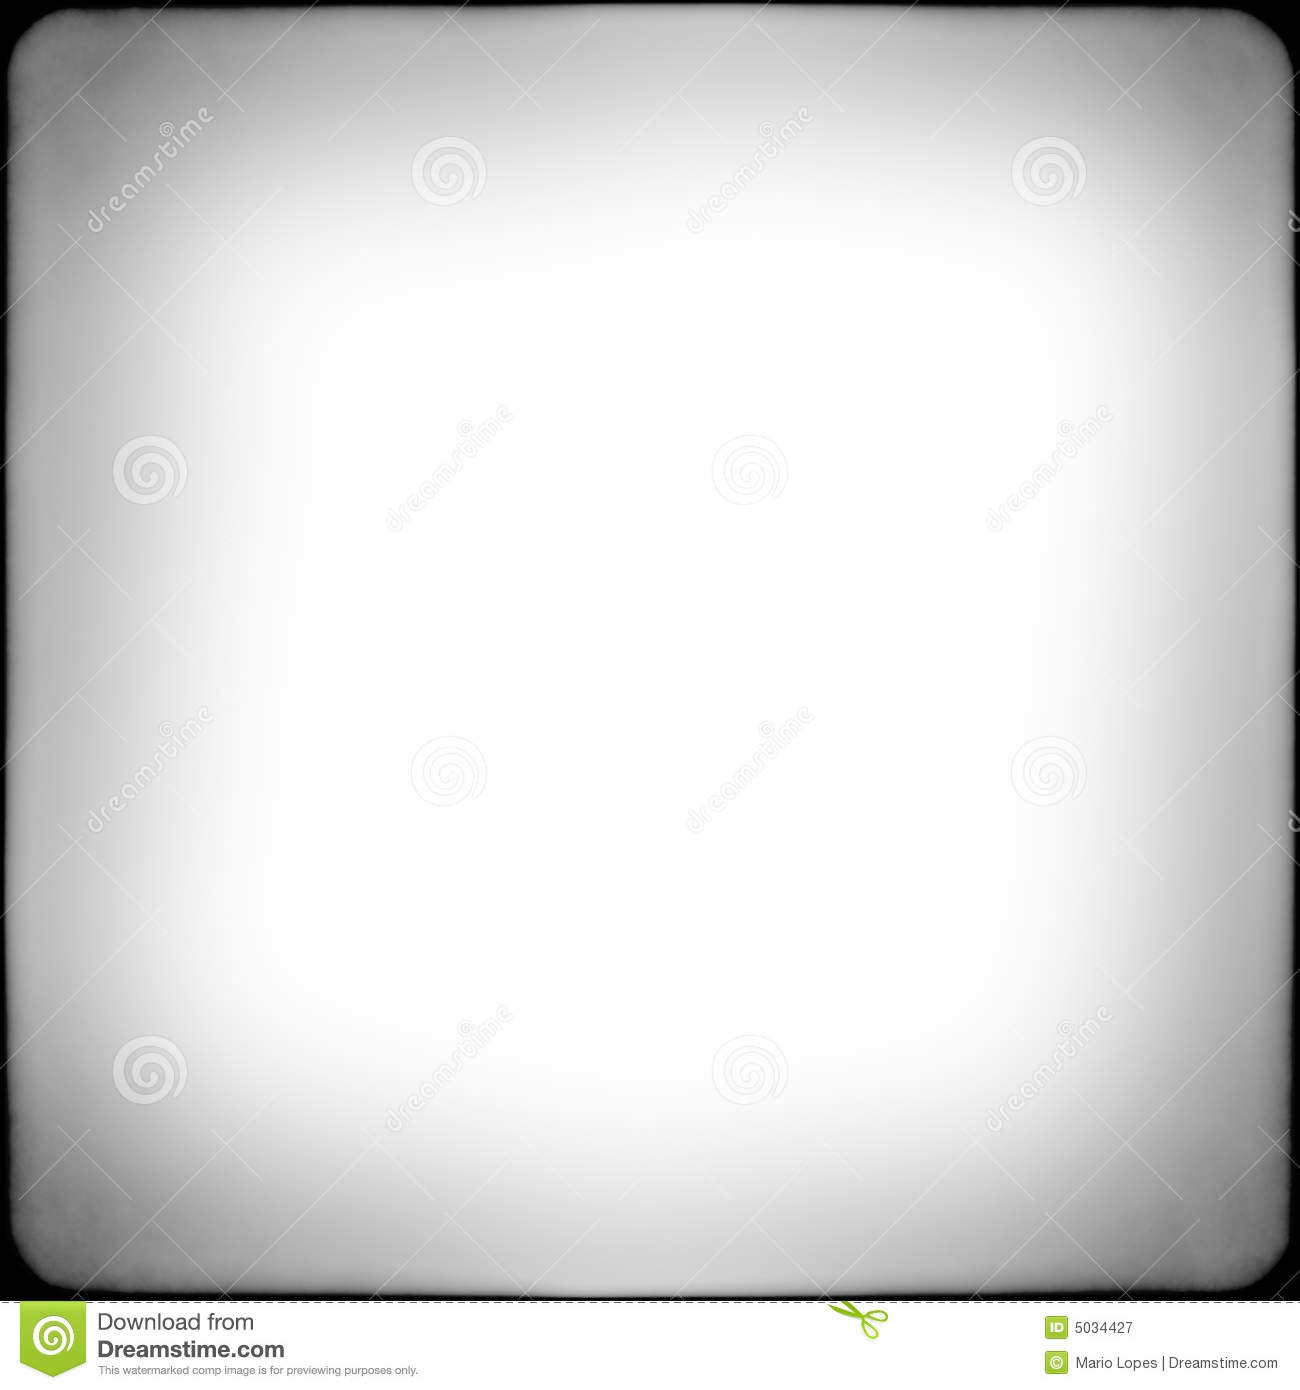 Black And White Square Frame Royalty Free Stock Photography   Image